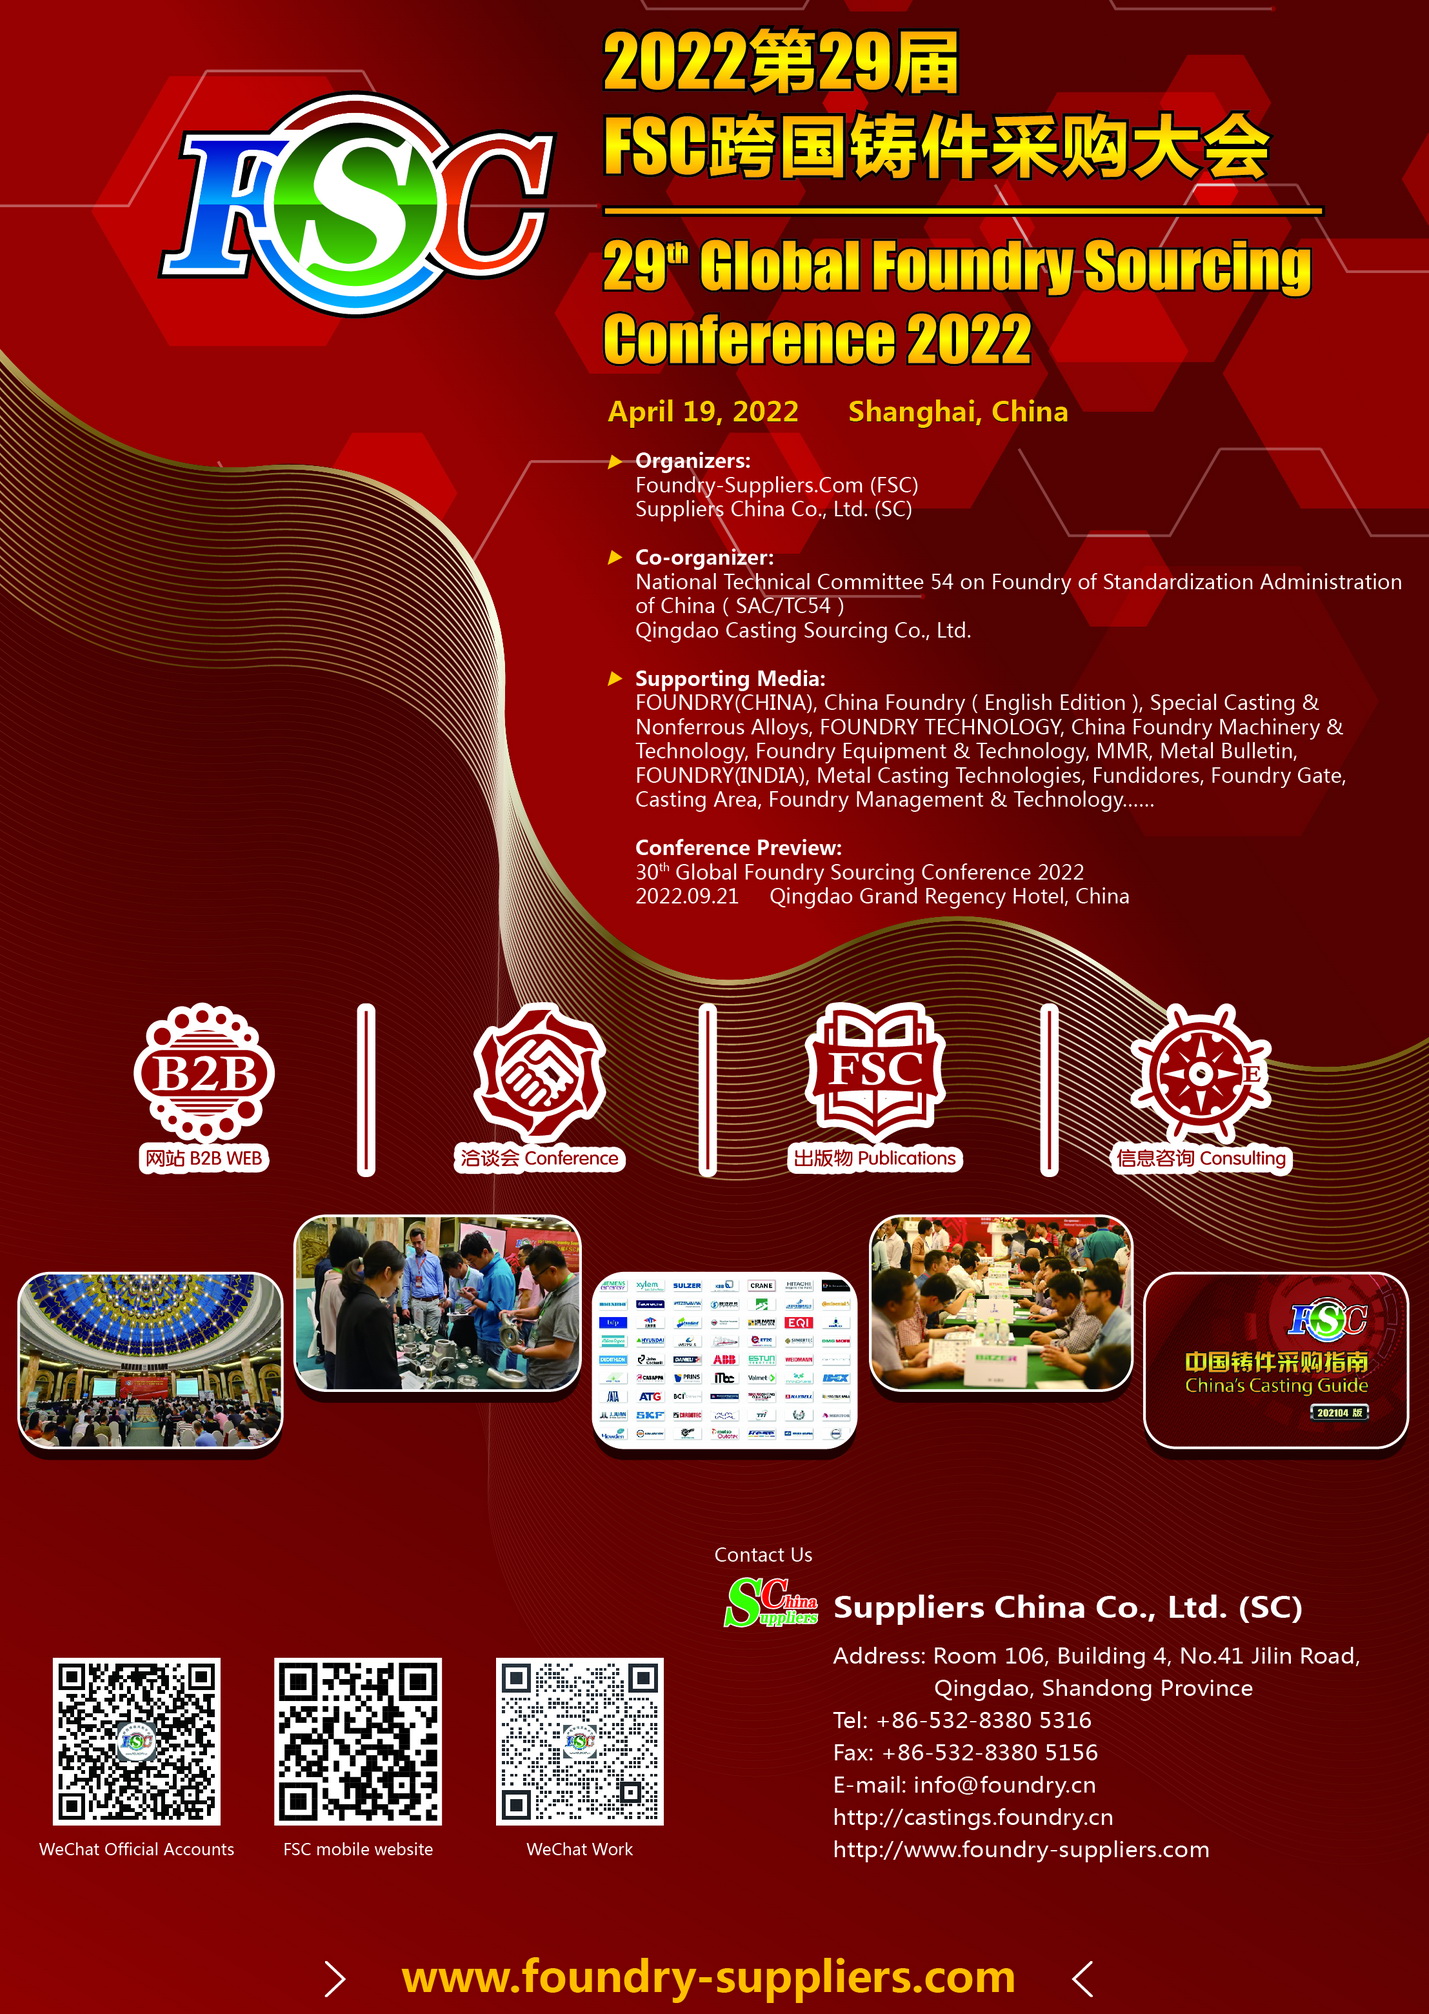 29th Global Foundry Sourcing Conference 2022, Shanghai, China